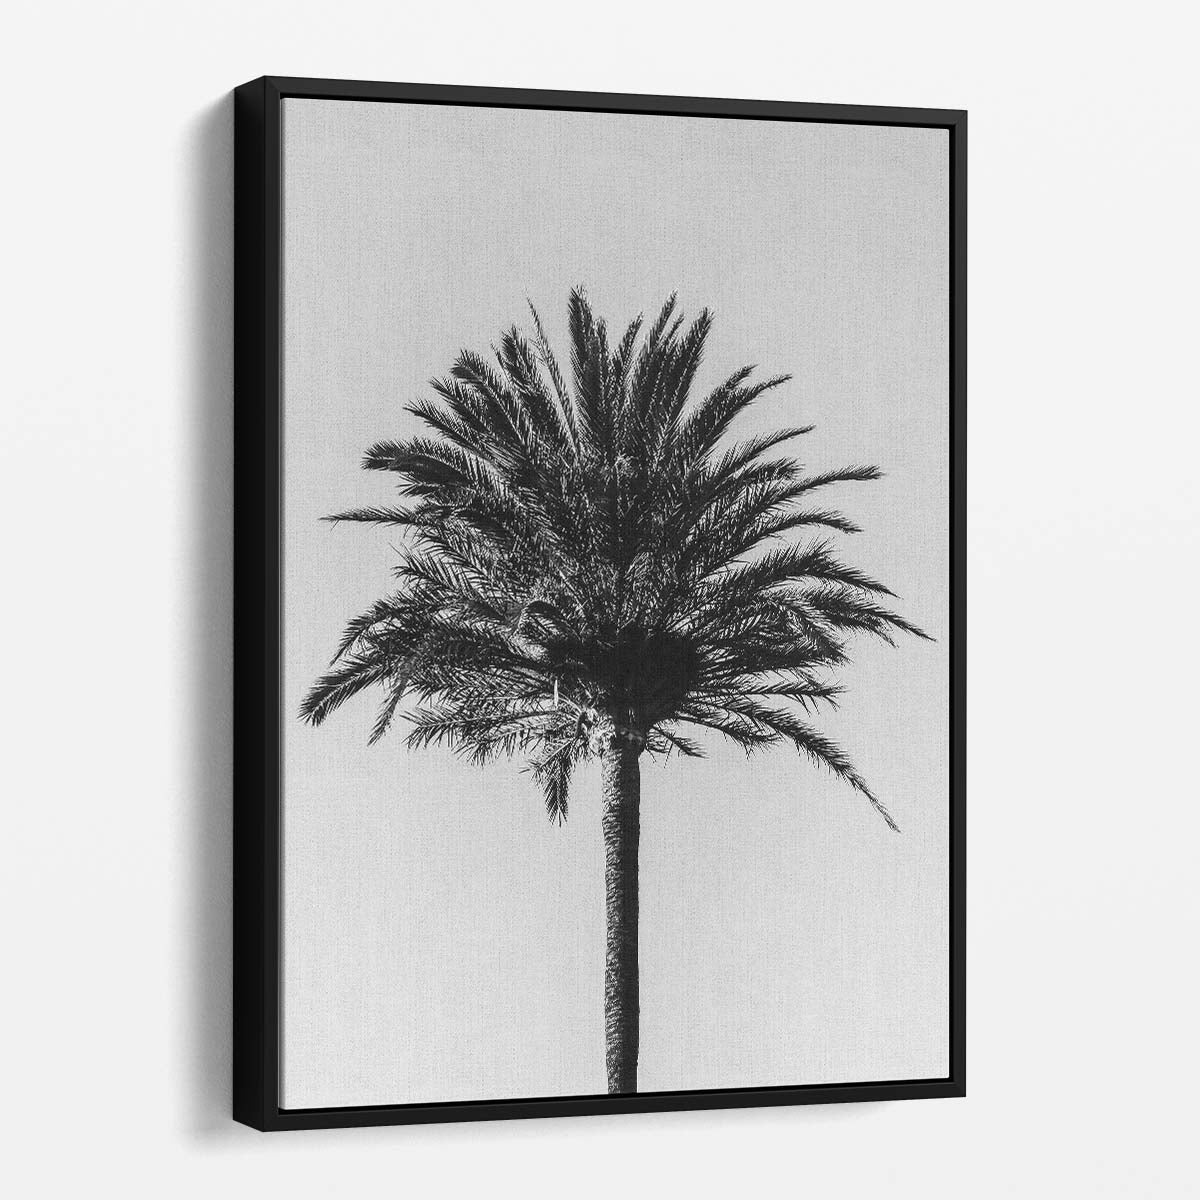 Minimalistic Monochrome Palm Tree Landscape Photography Art by Luxuriance Designs, made in USA